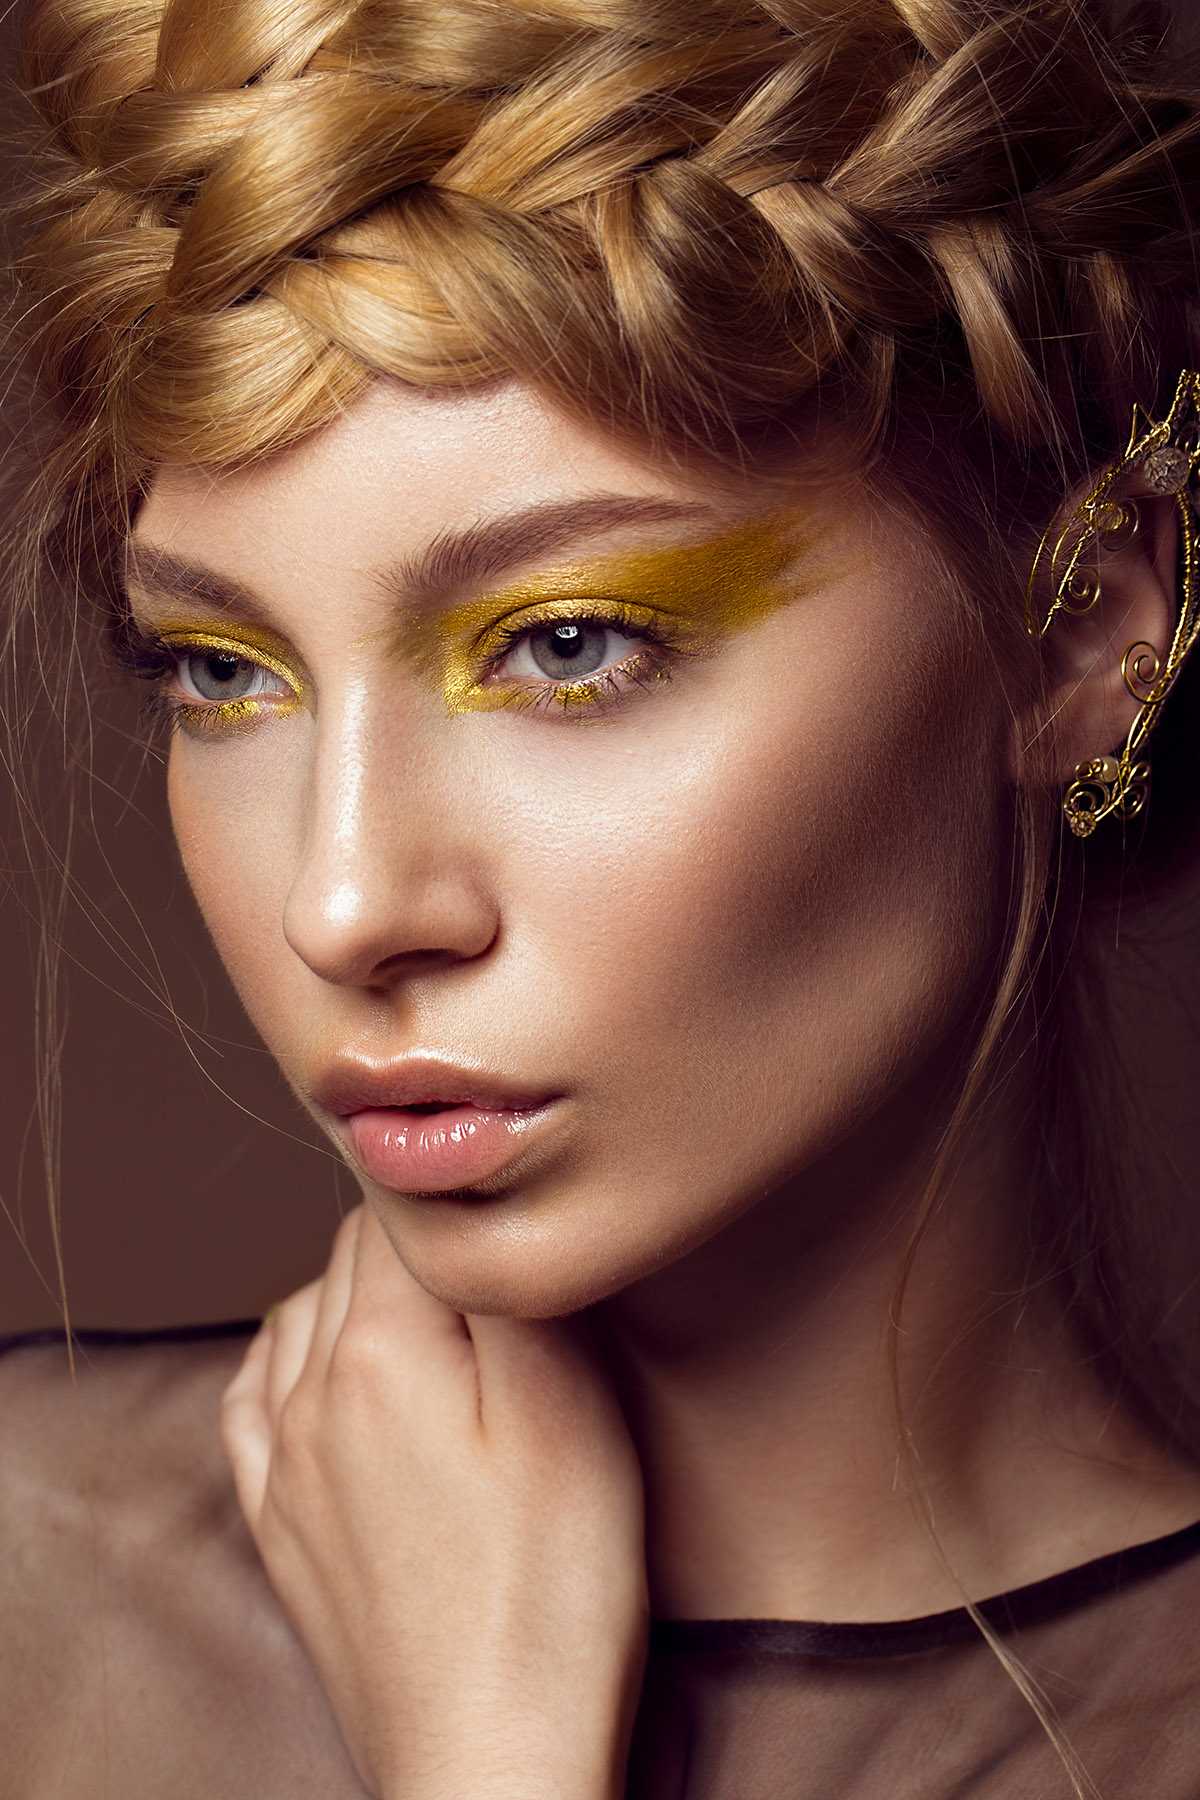 Beautiful girl in a gold dress with creative makeup and braids on her head. The beauty of the face. Photos shot in the studio.